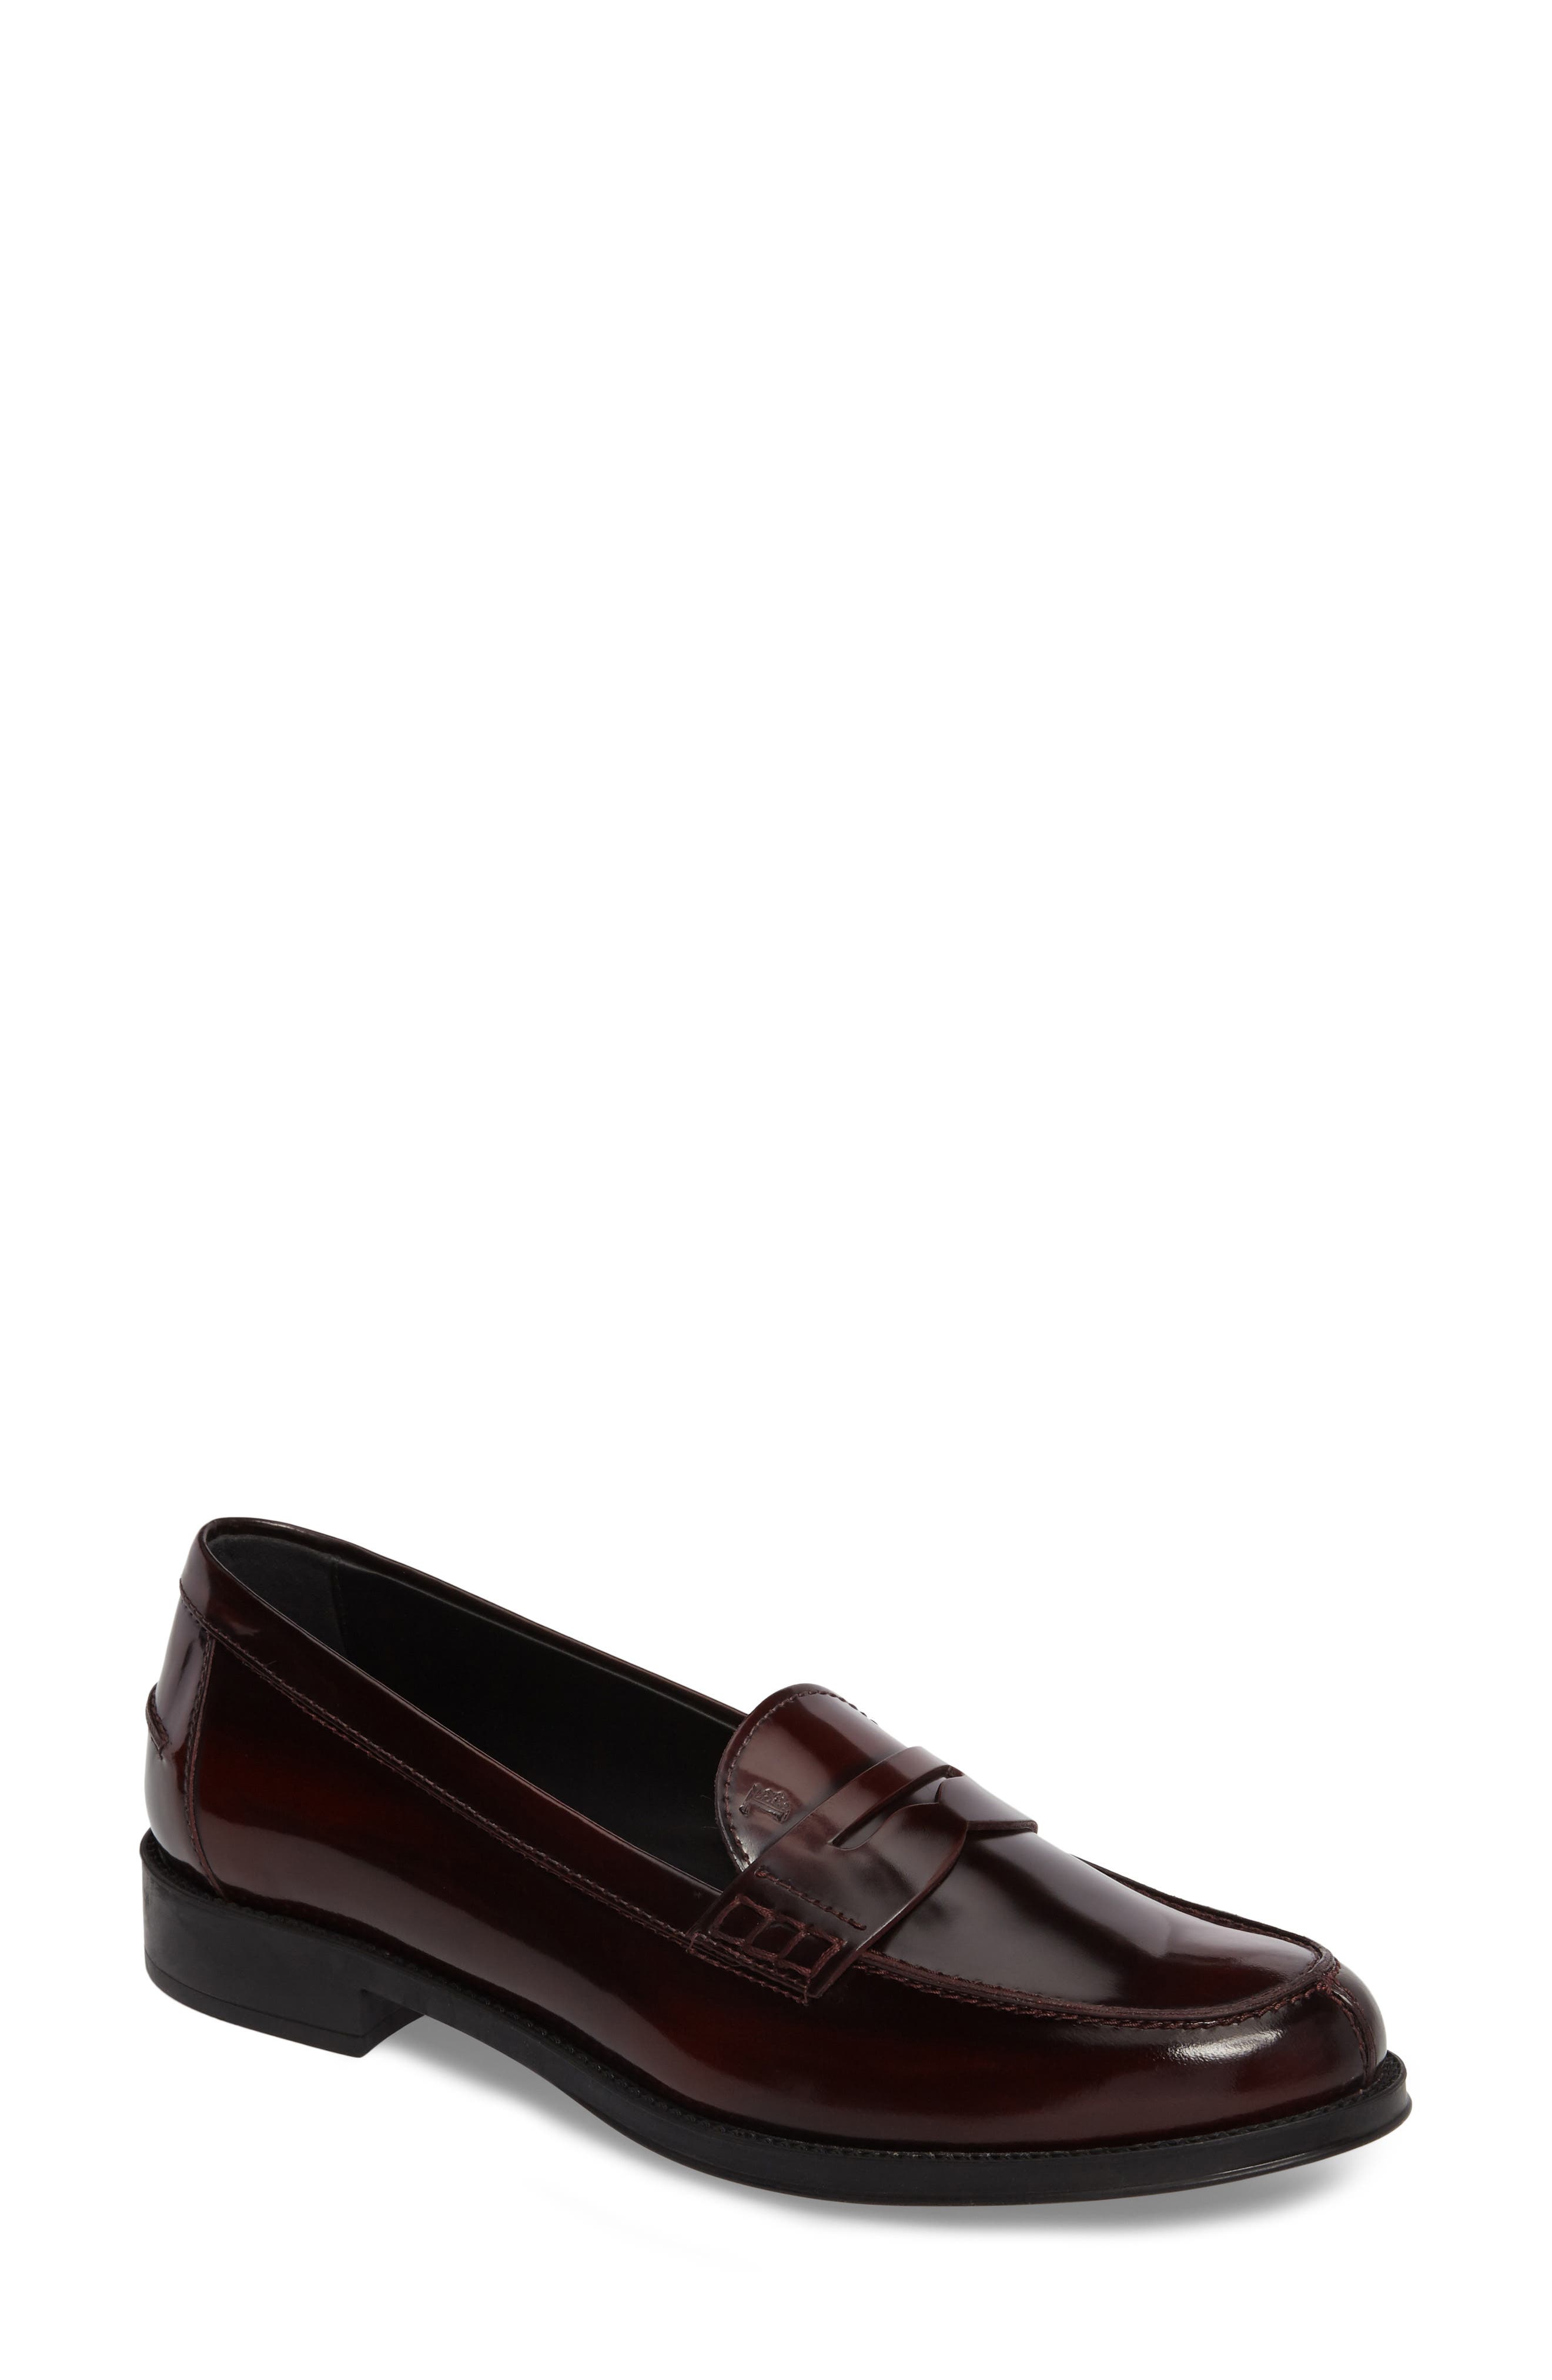 h and m loafers womens